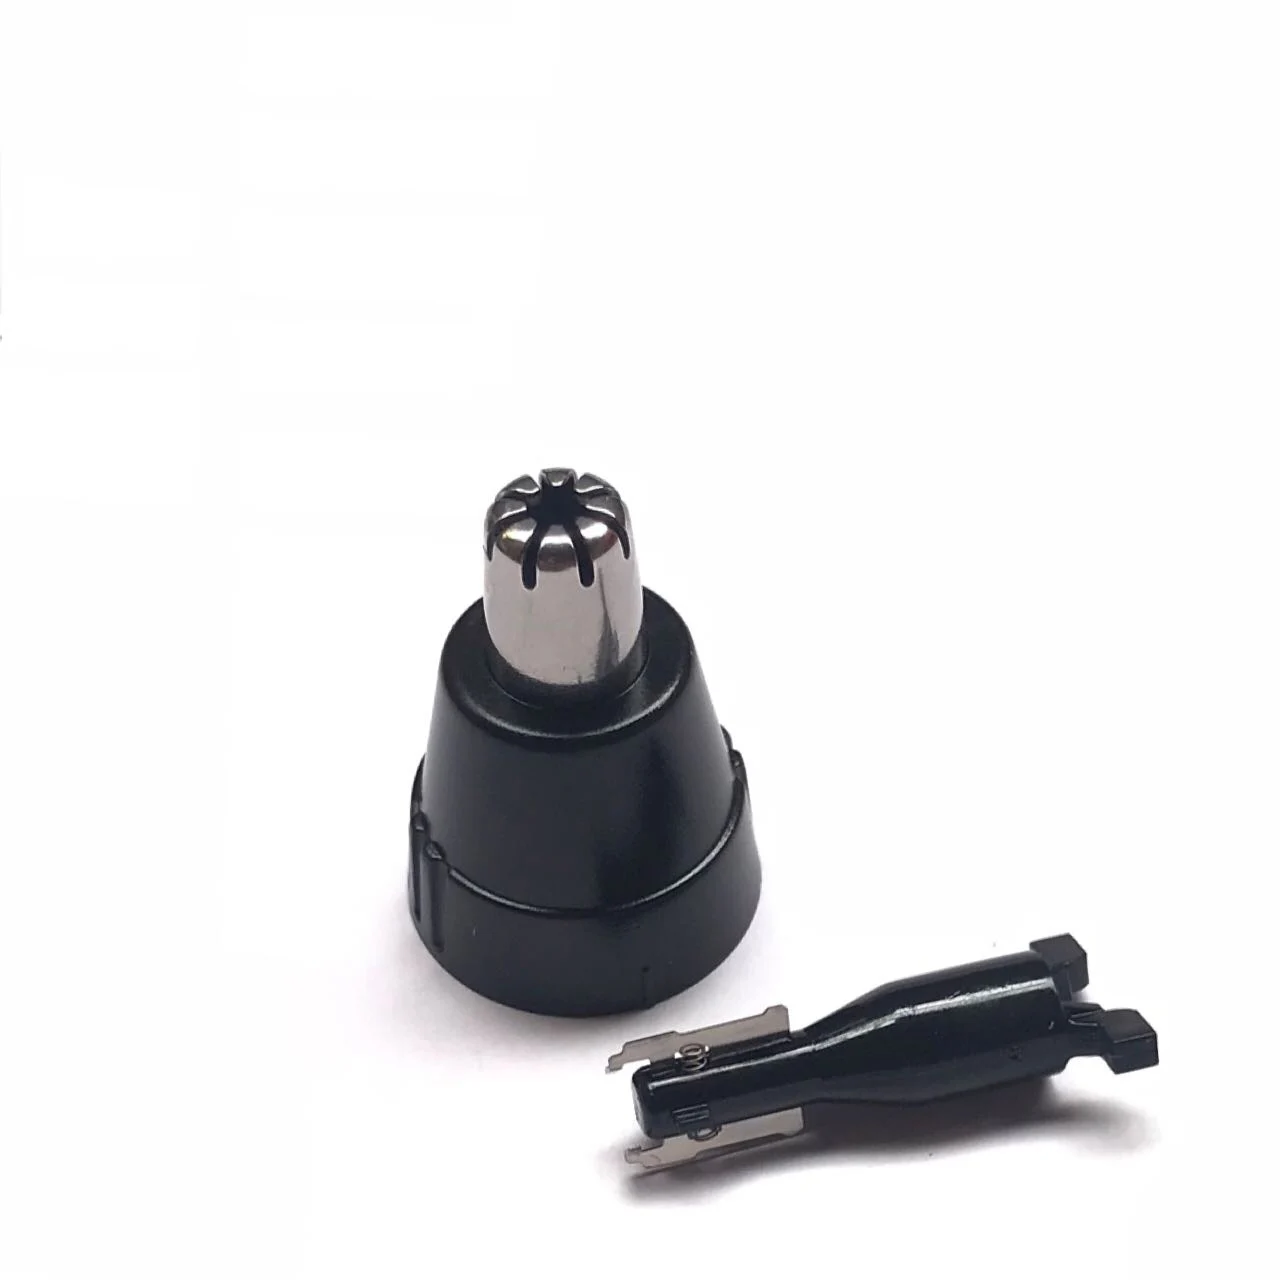 

1Pcs Nose hair trimmer Cutter head Trimmer For Panasonic ER-GN30 ER-GN30k ER-GN30W ER-GN10 ER417 ER-GN50 ER-GN40